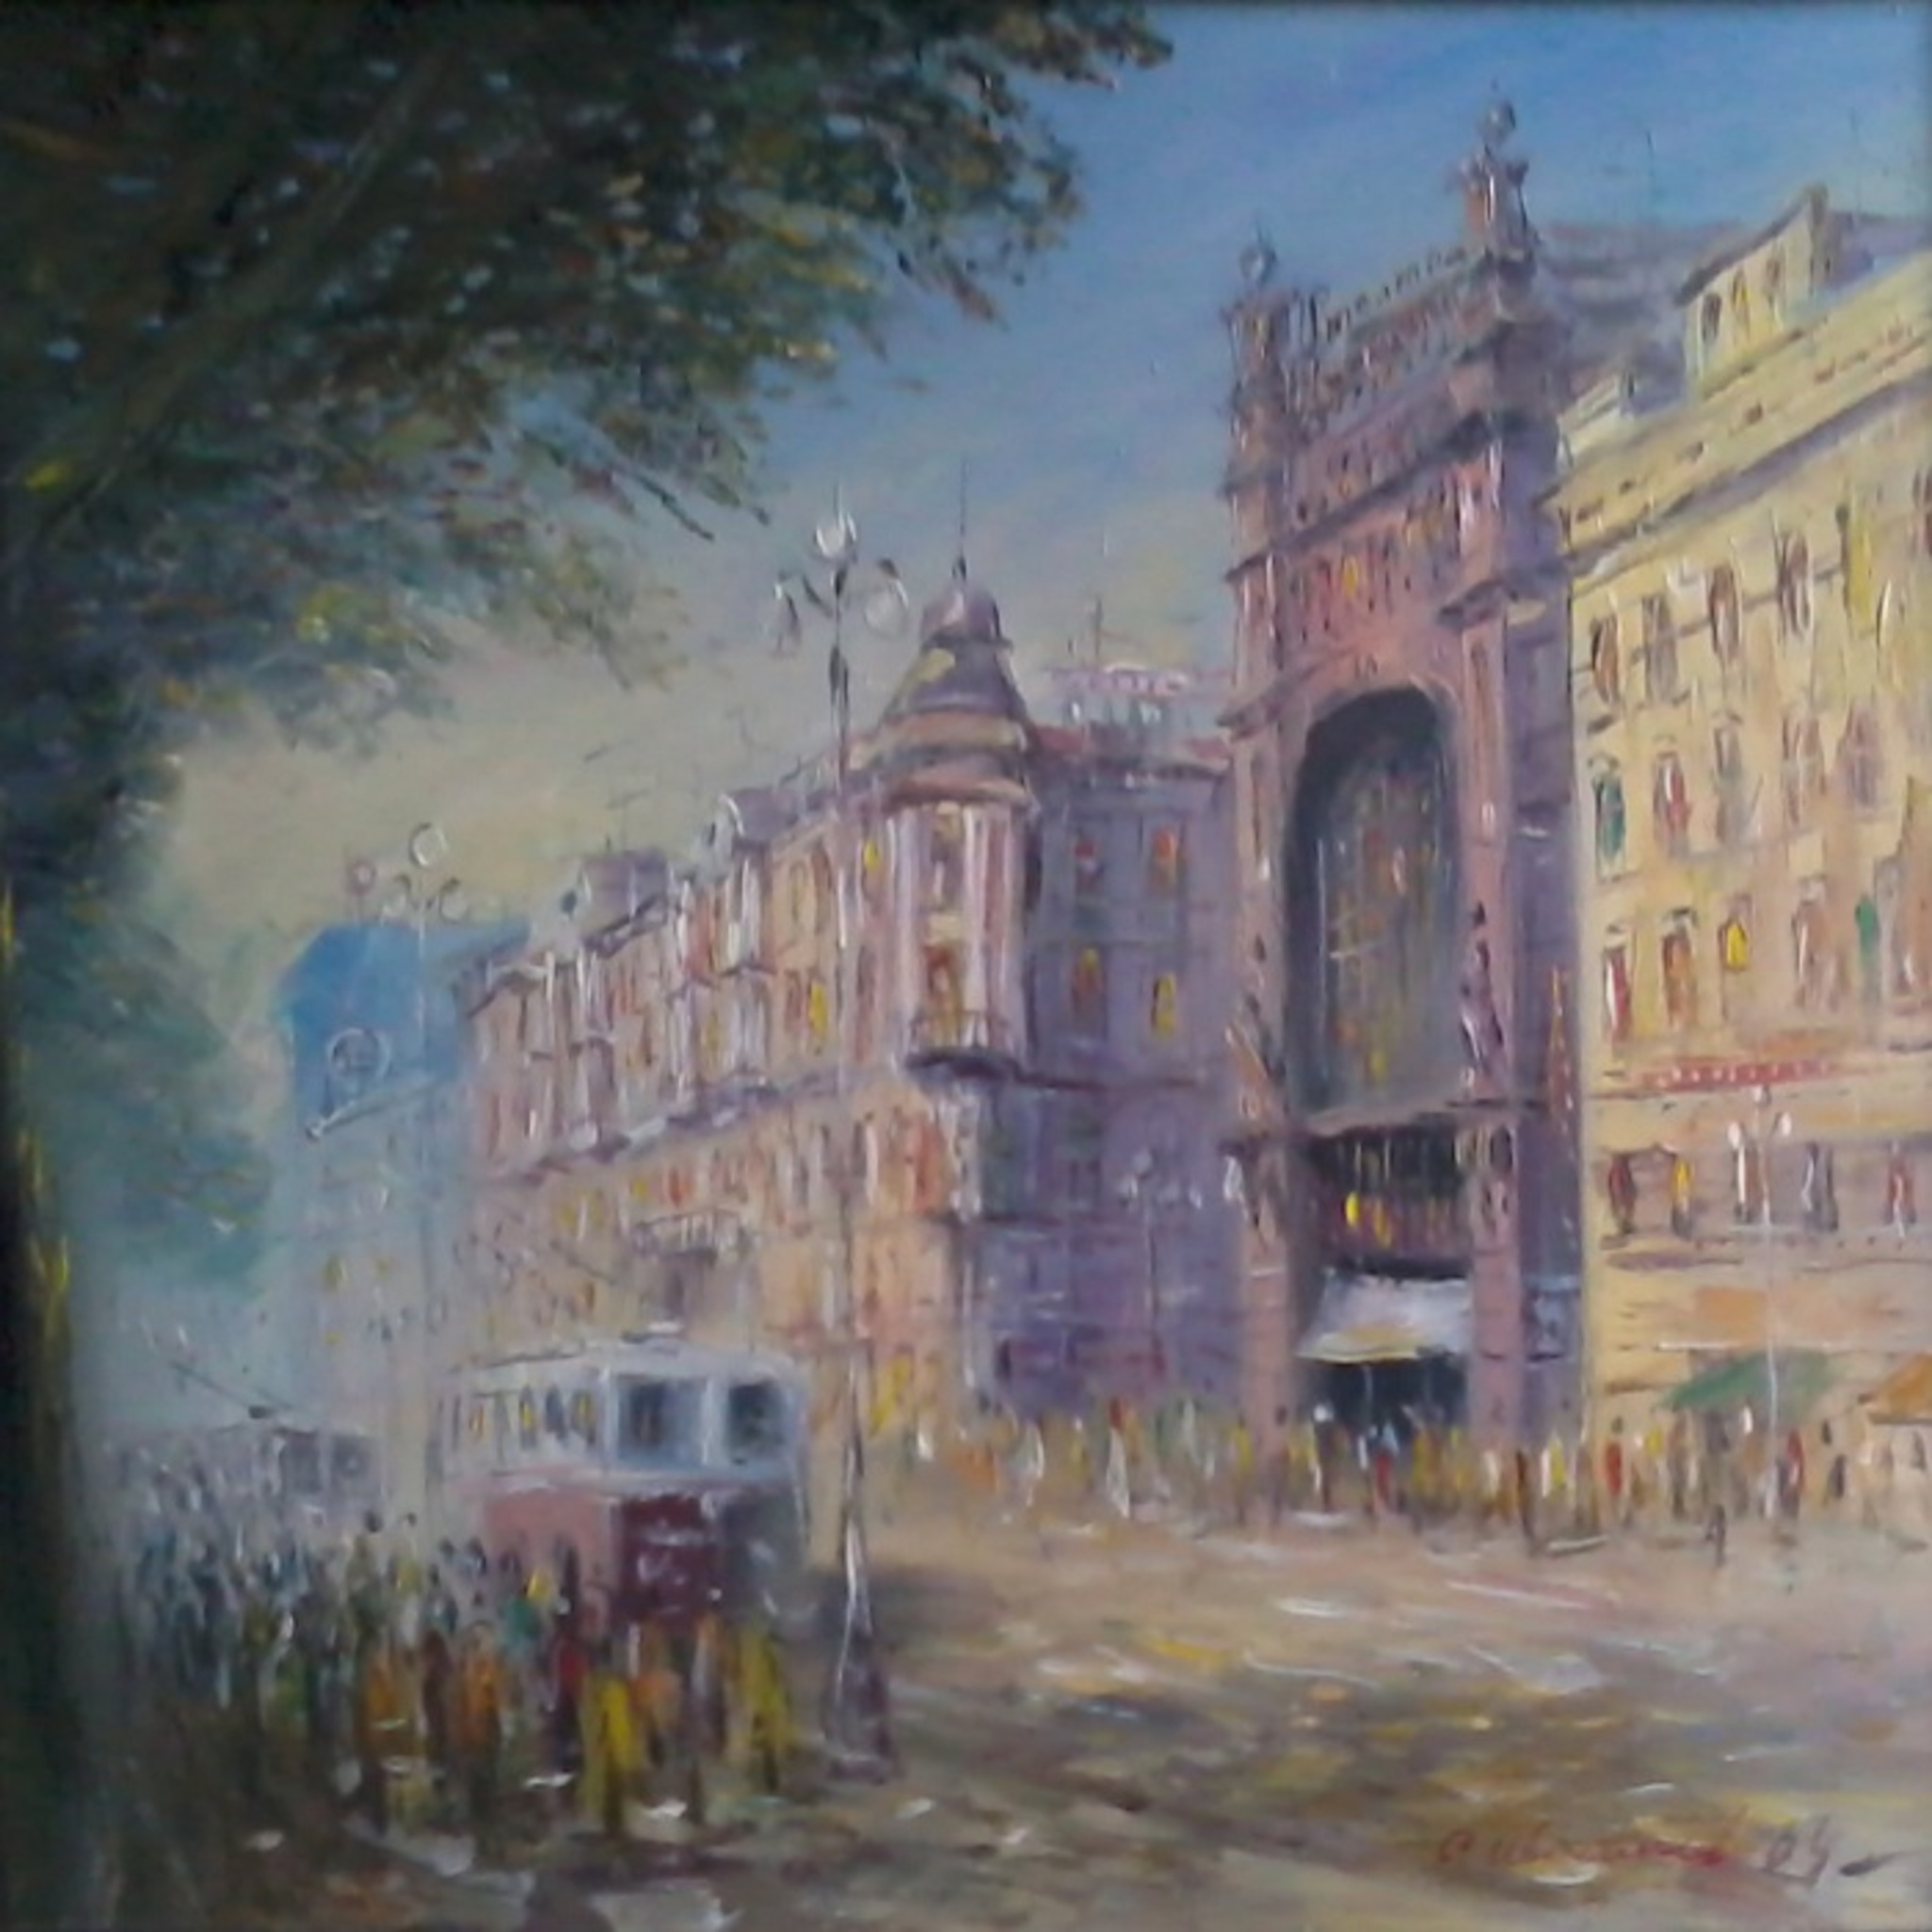 Exhibition of paintings by Semyon Ivanchenko My City